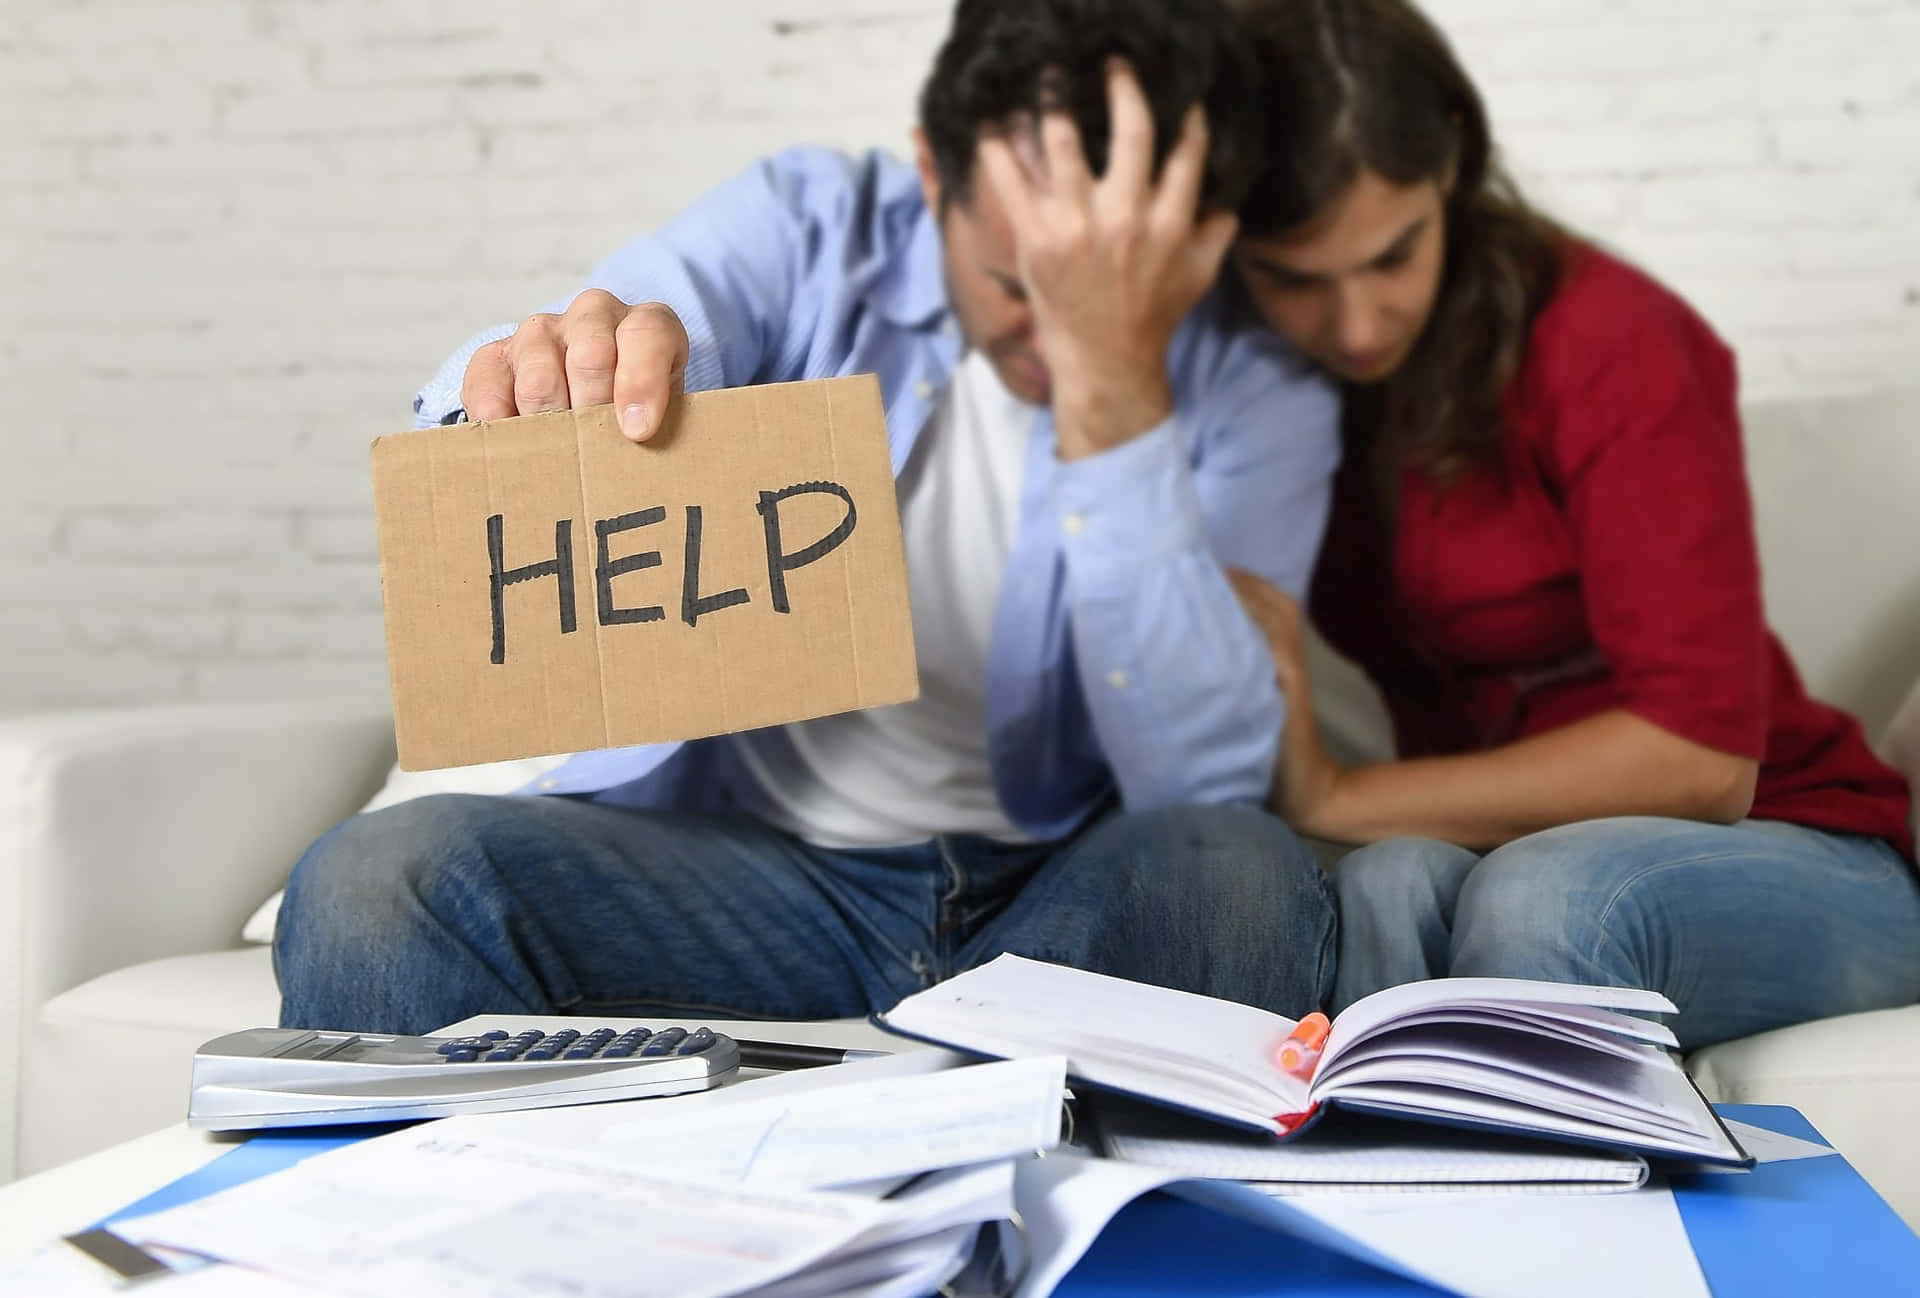 Couple Perturbed By Financial Problems Wallpaper